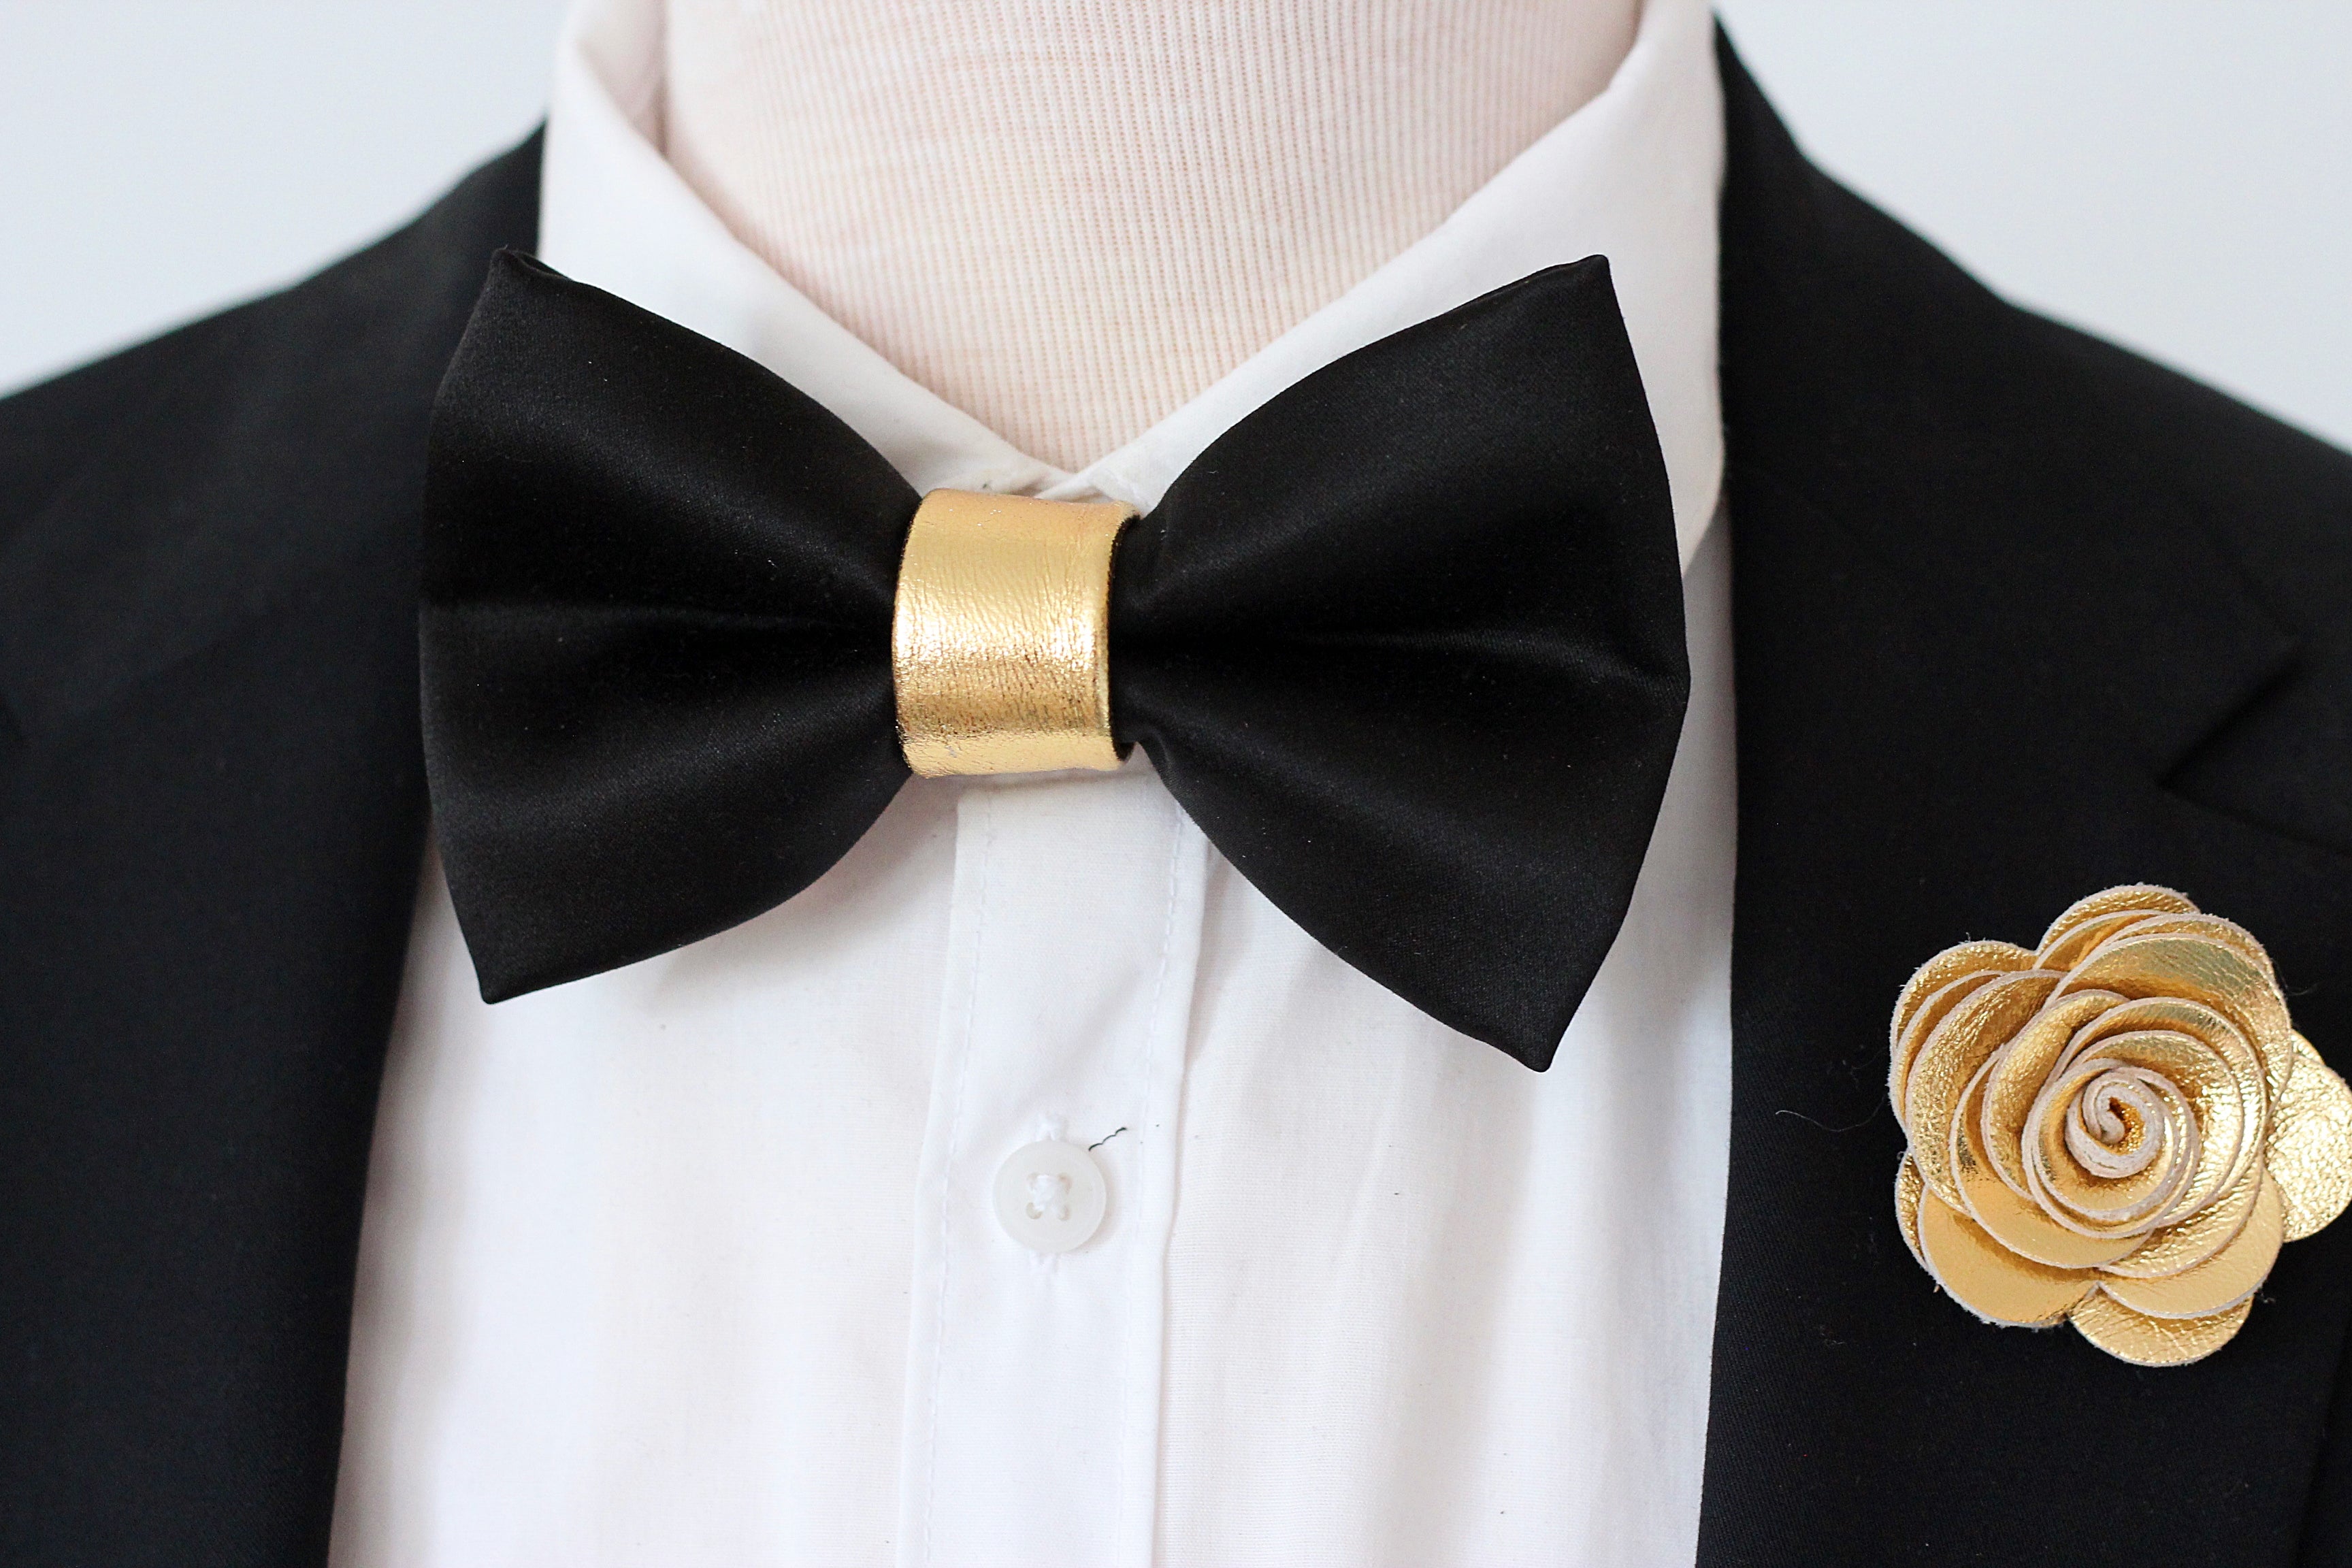 Black and Gold Mens Bow Tie Boutonniere Set, Wedding Black Gold Bowtie, Black Satin Tuxedo Bow Tie Bow Tie Only